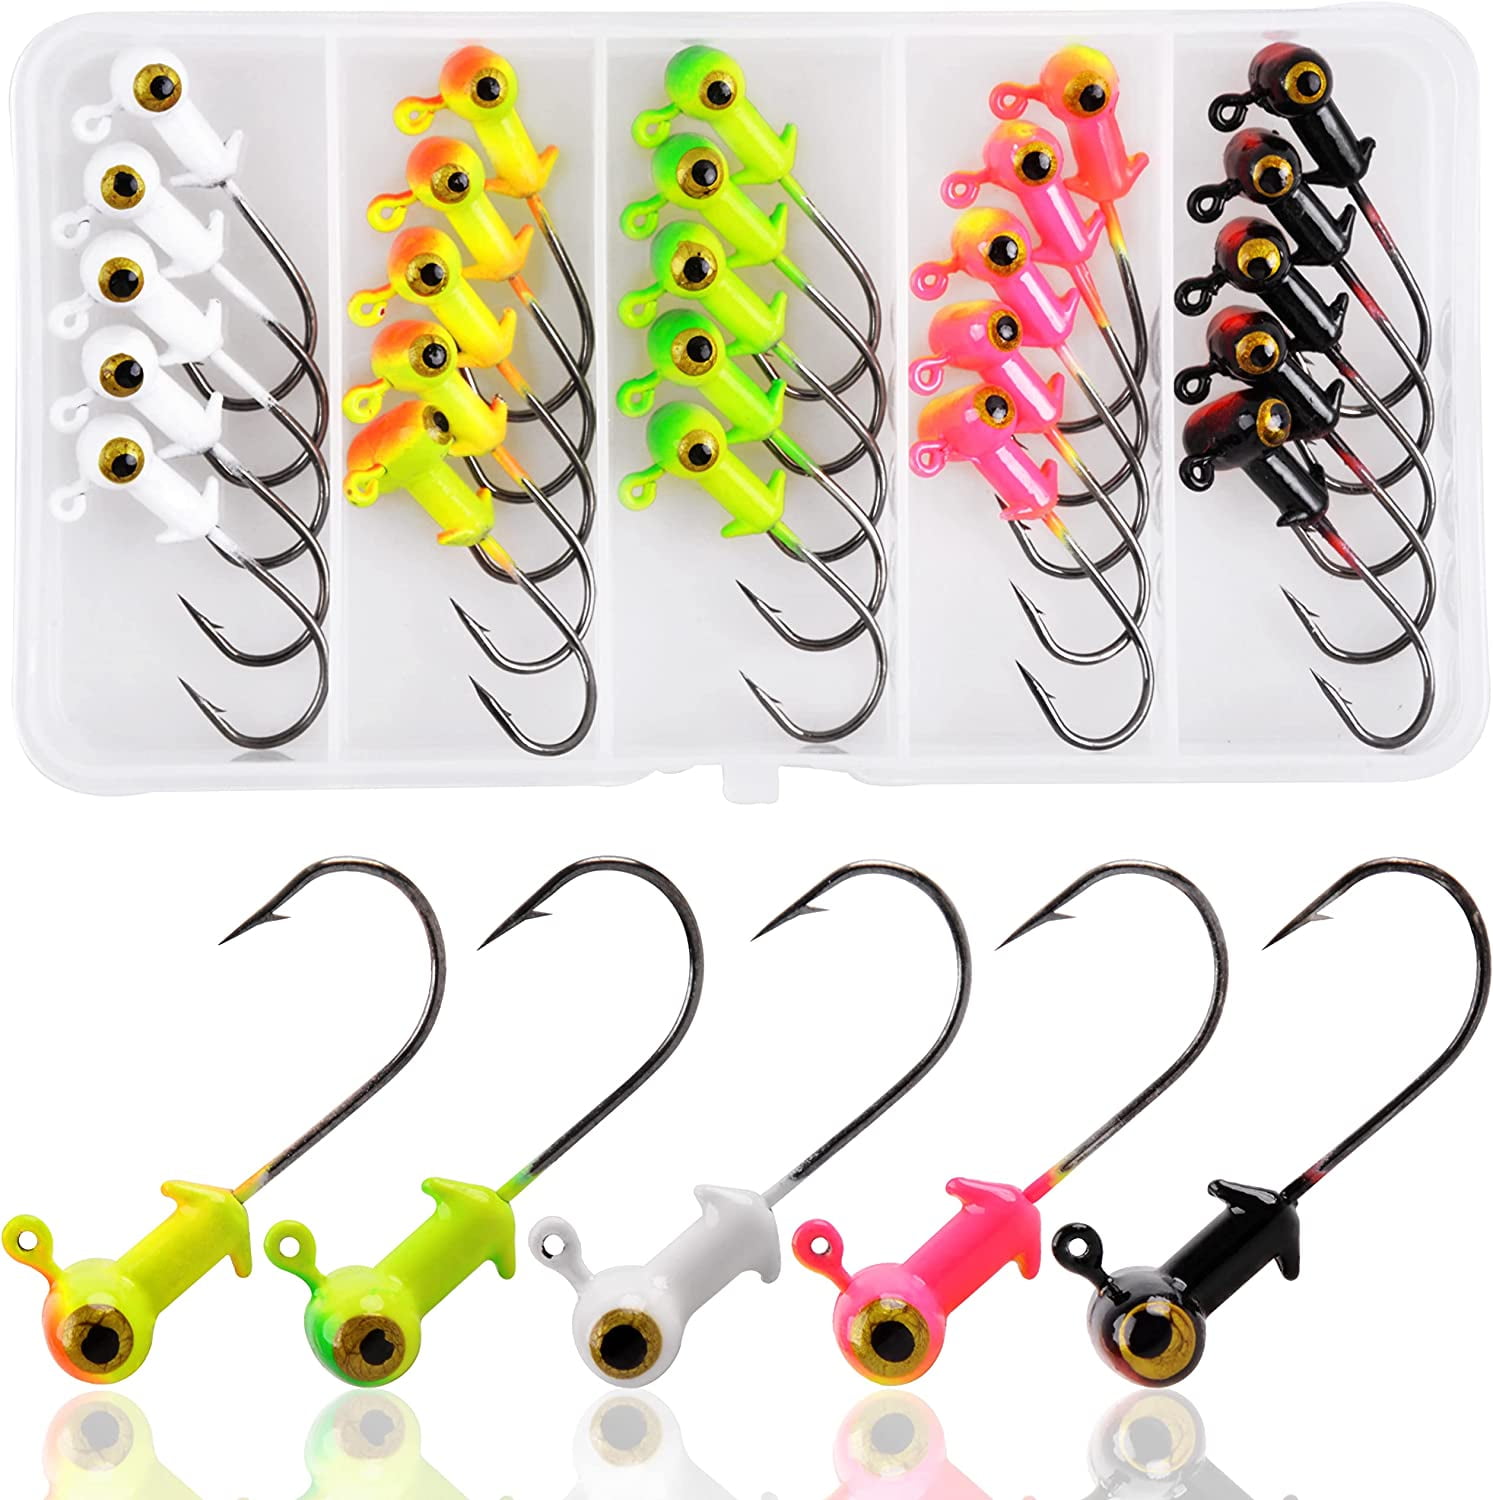 Skylety 60 Pcs Jig Heads for Fishing Crappie Jig Heads Lures Double Eye  Ball Heads Fishing Hooks for Bass Trout for Freshwater and Saltwater